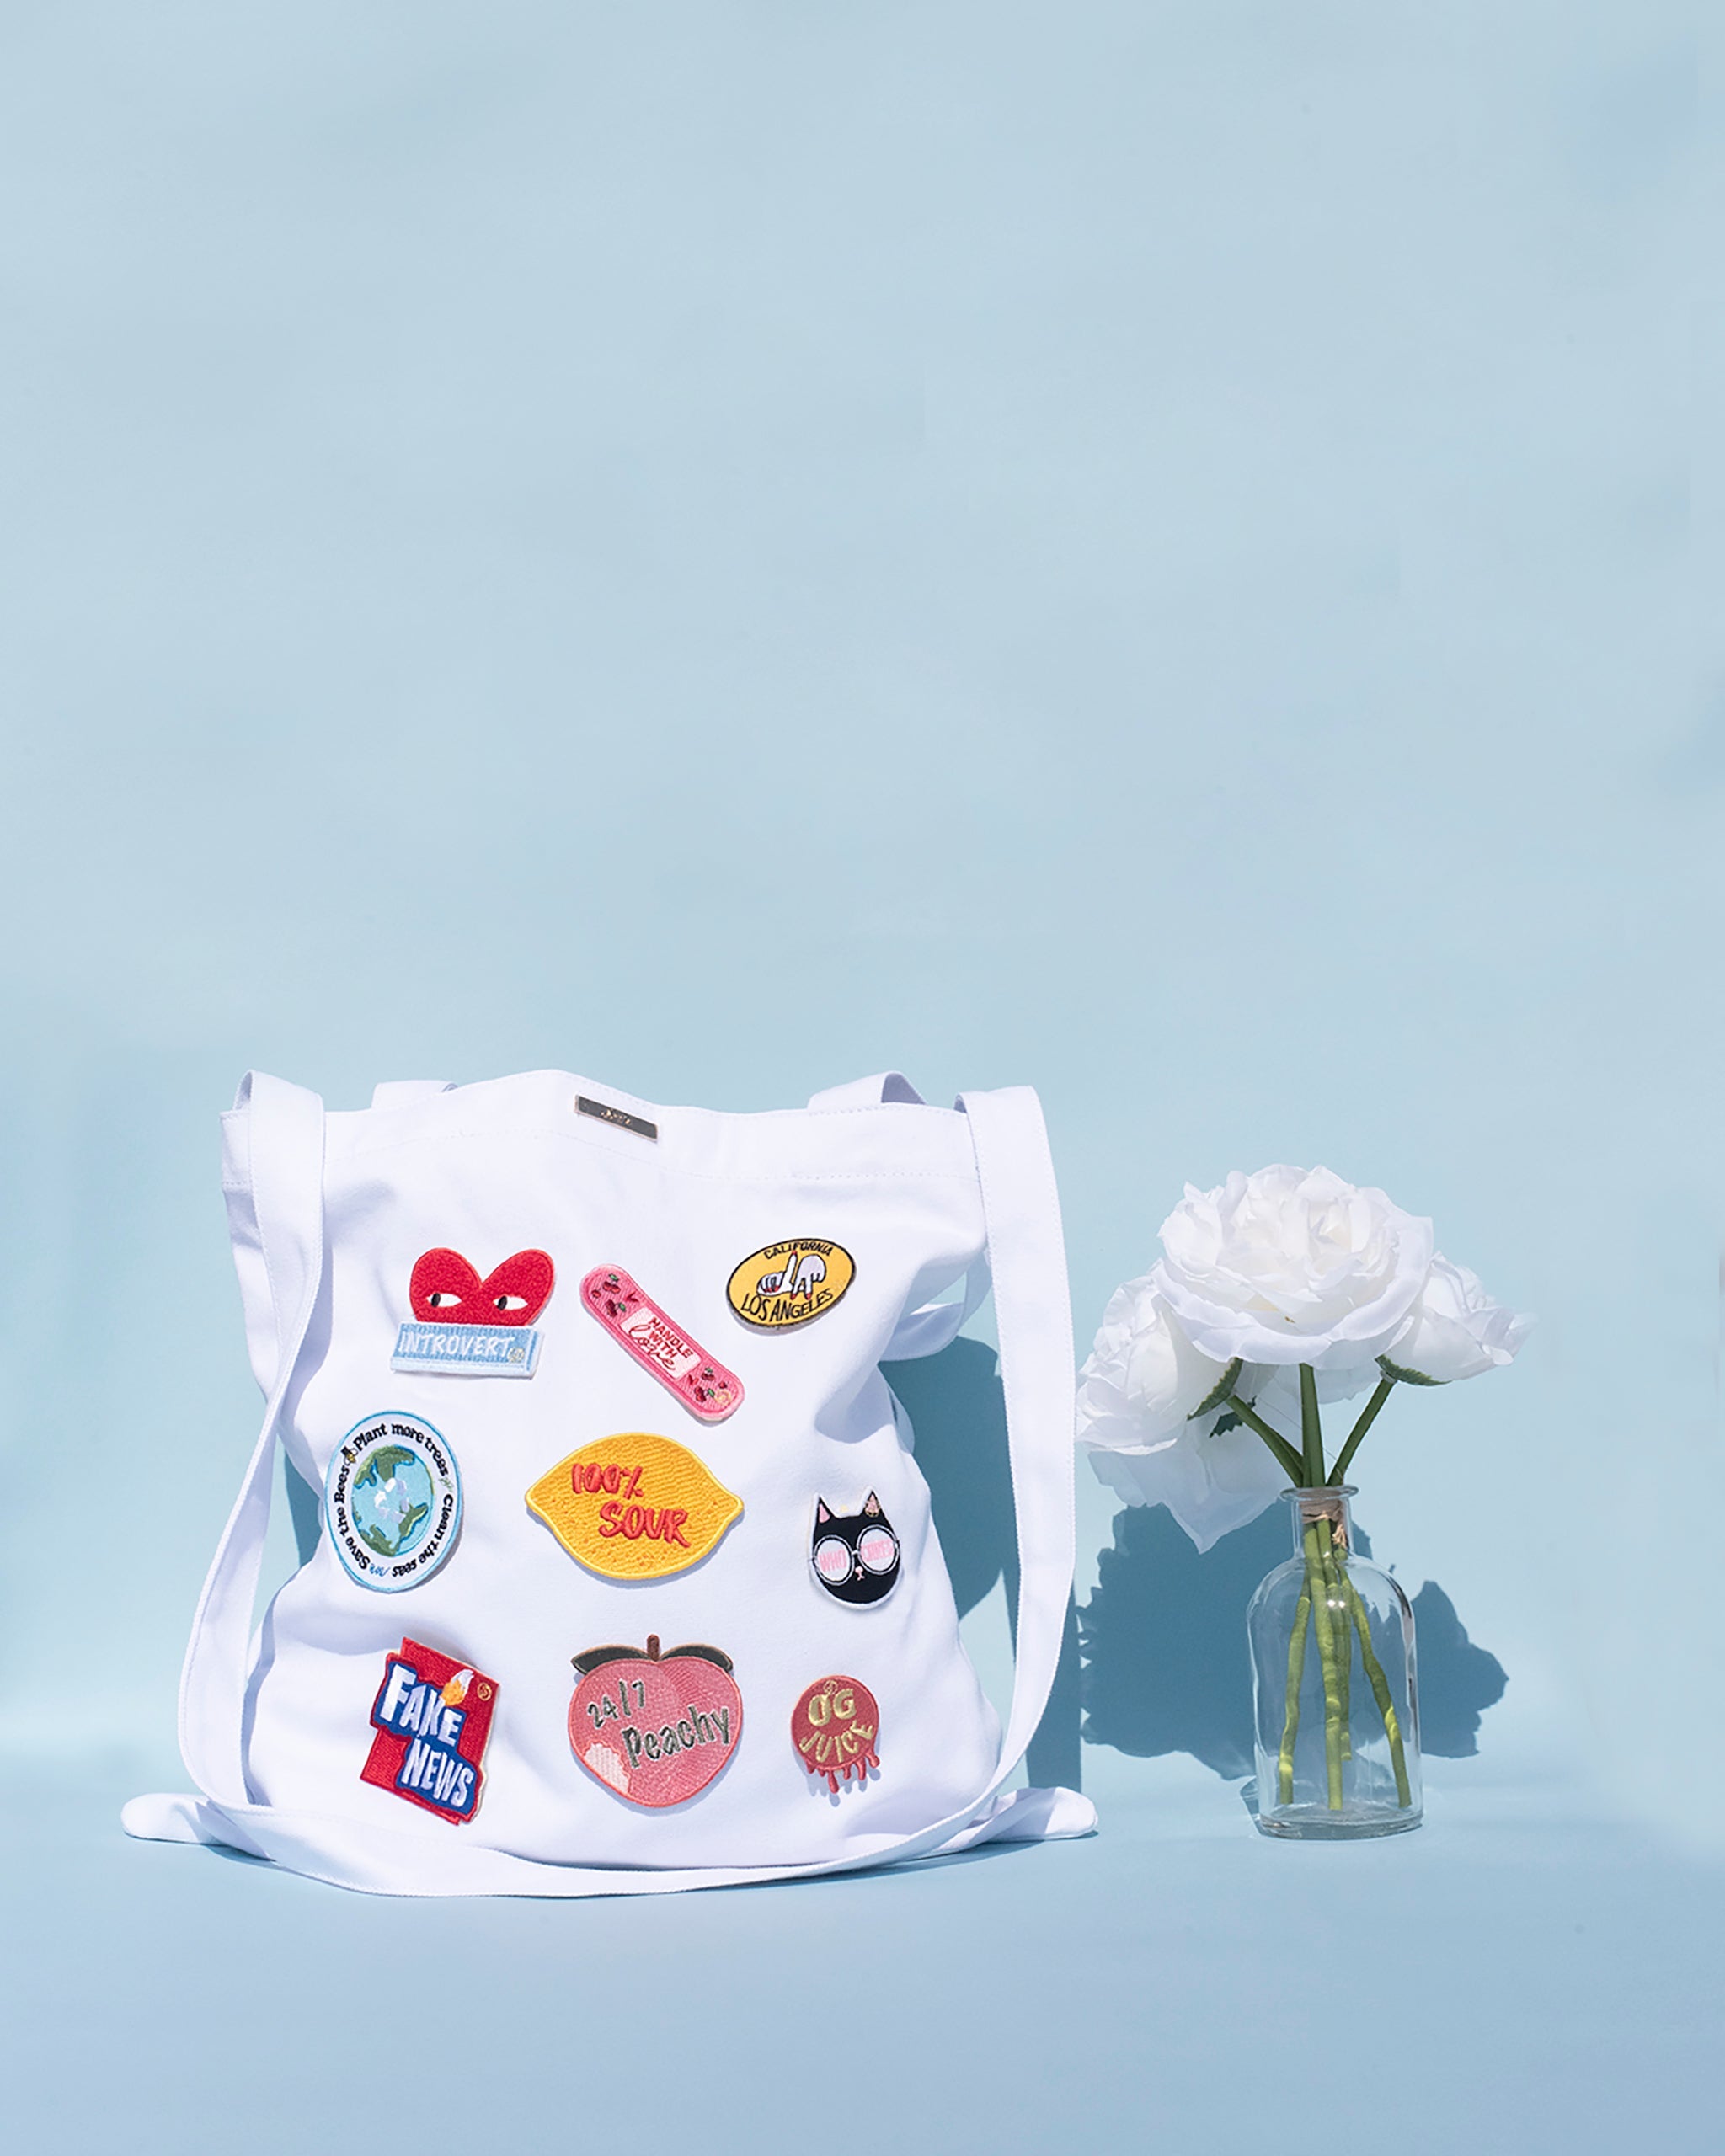 Accessories - Make It Yours Bag - White